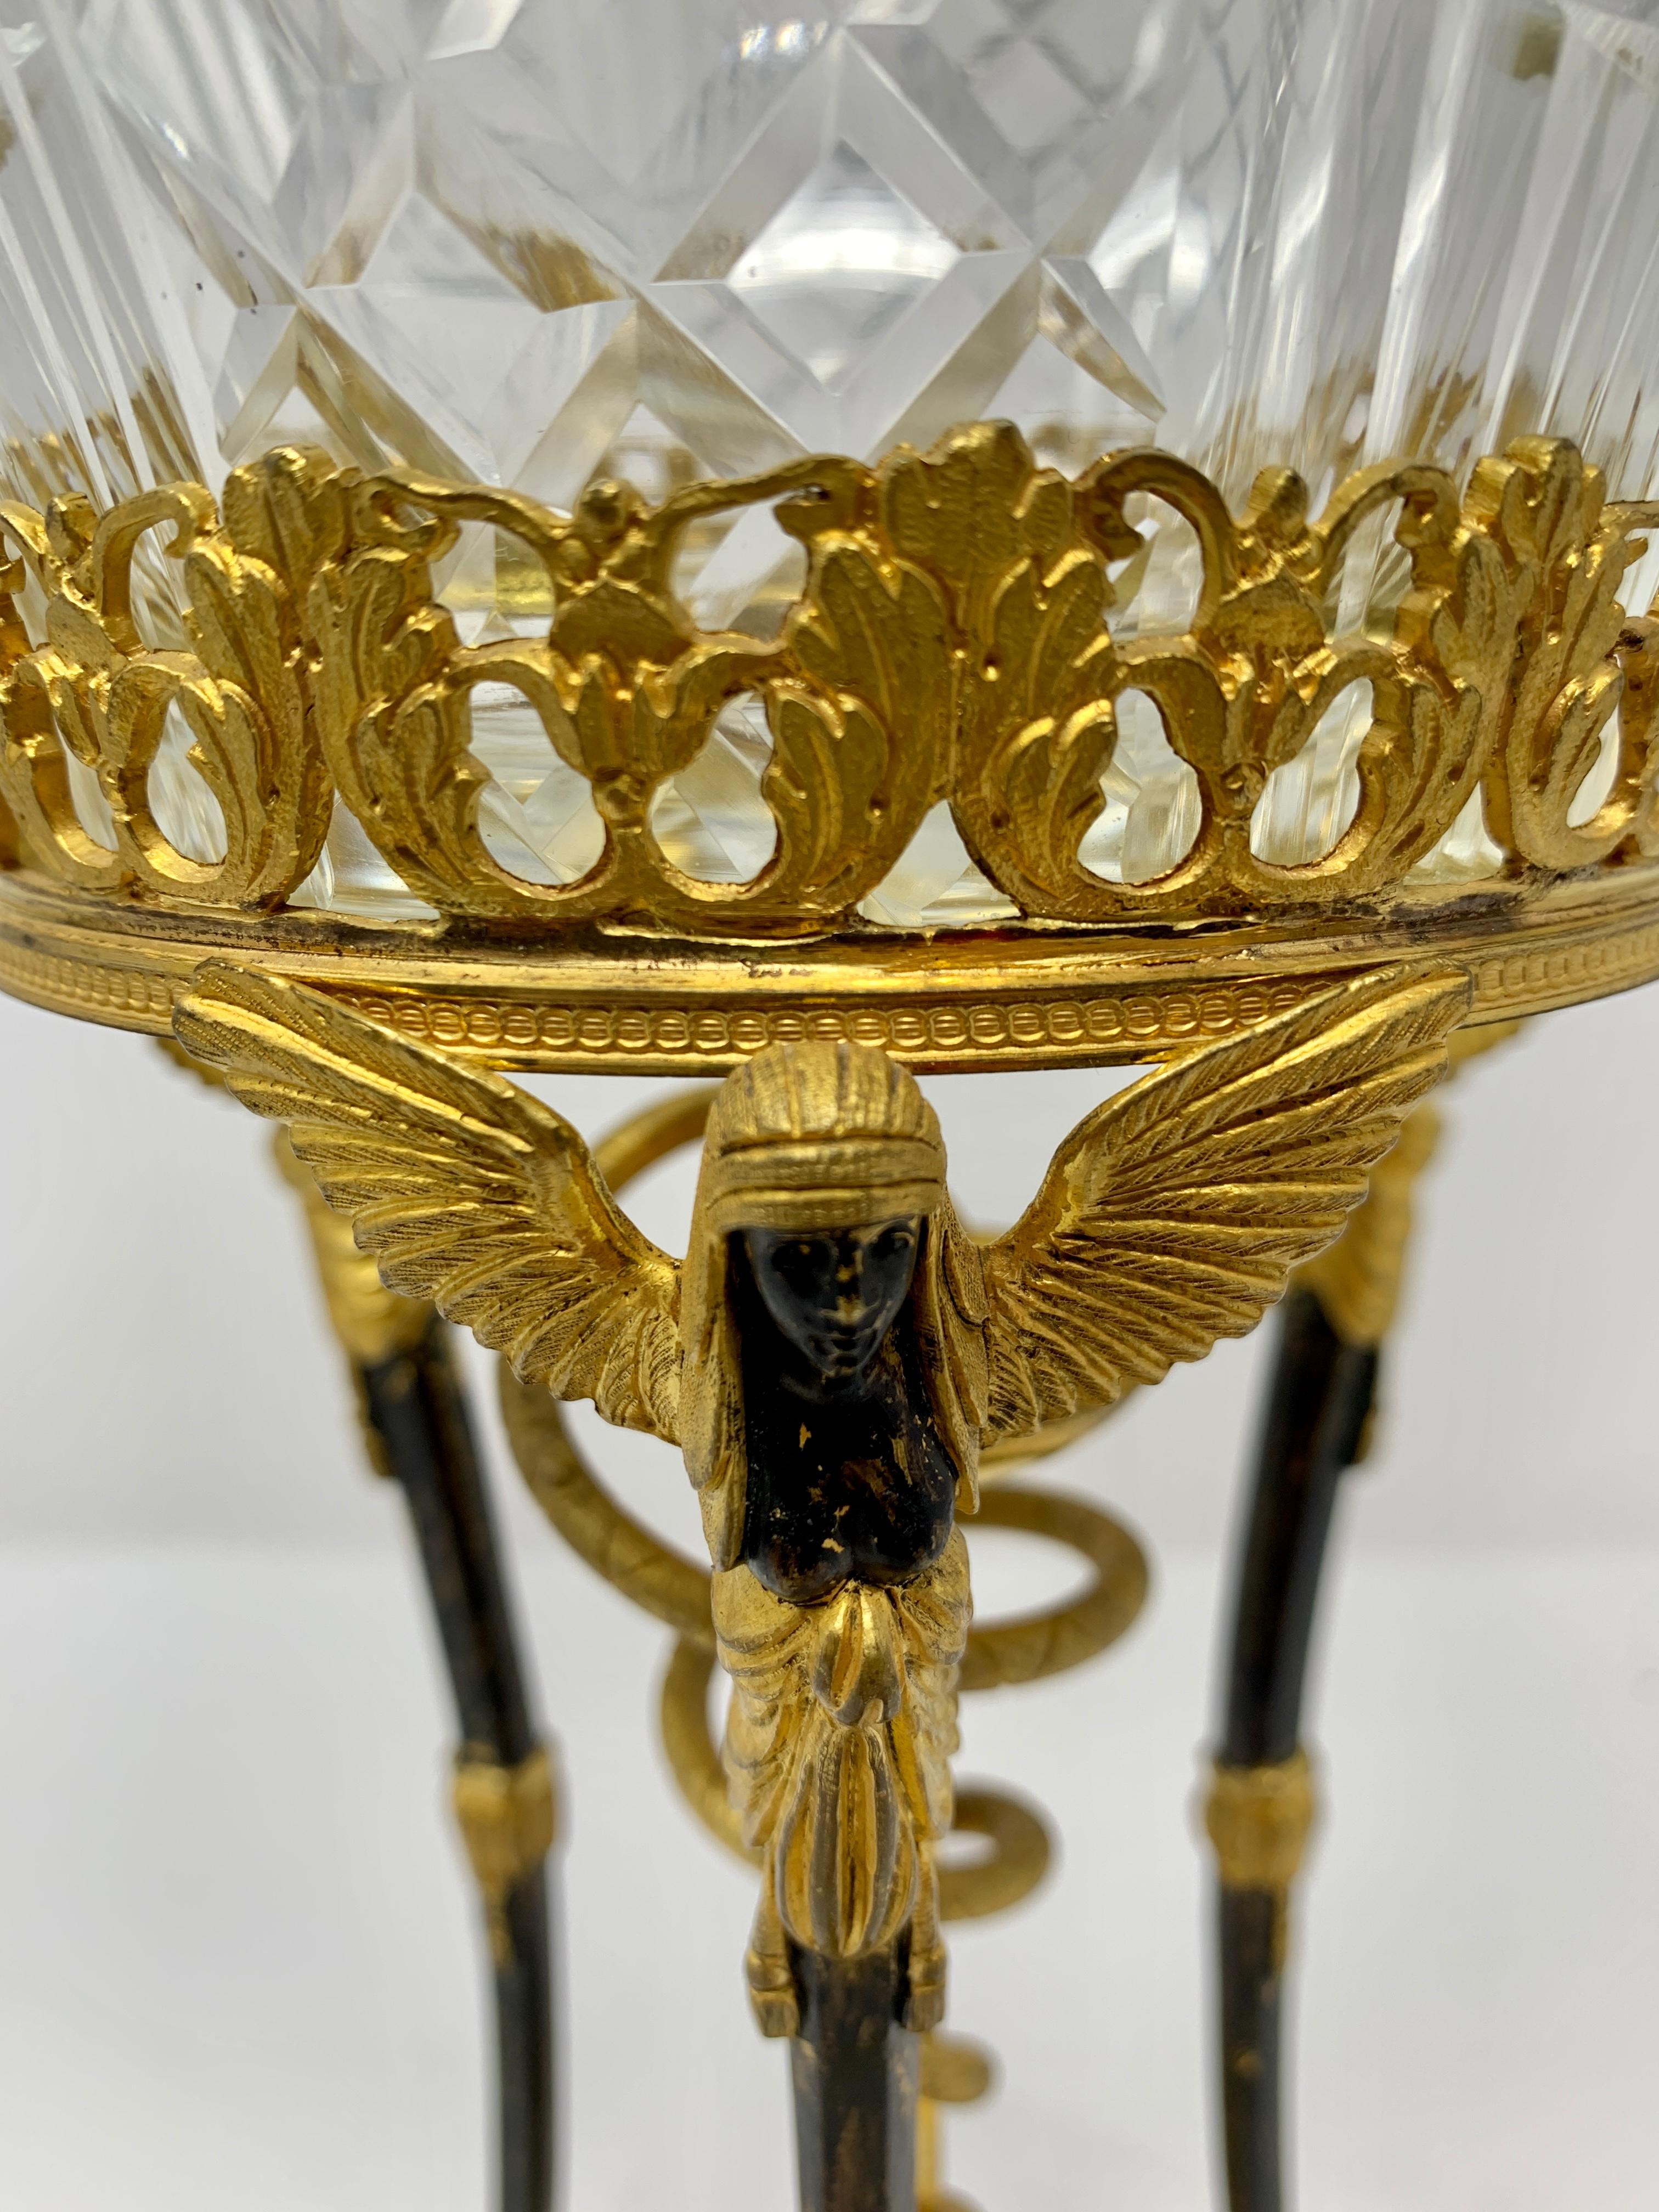 Antique French Empire Period Crystal and Ormolu Centerpiece, circa 1815-1825 For Sale 1